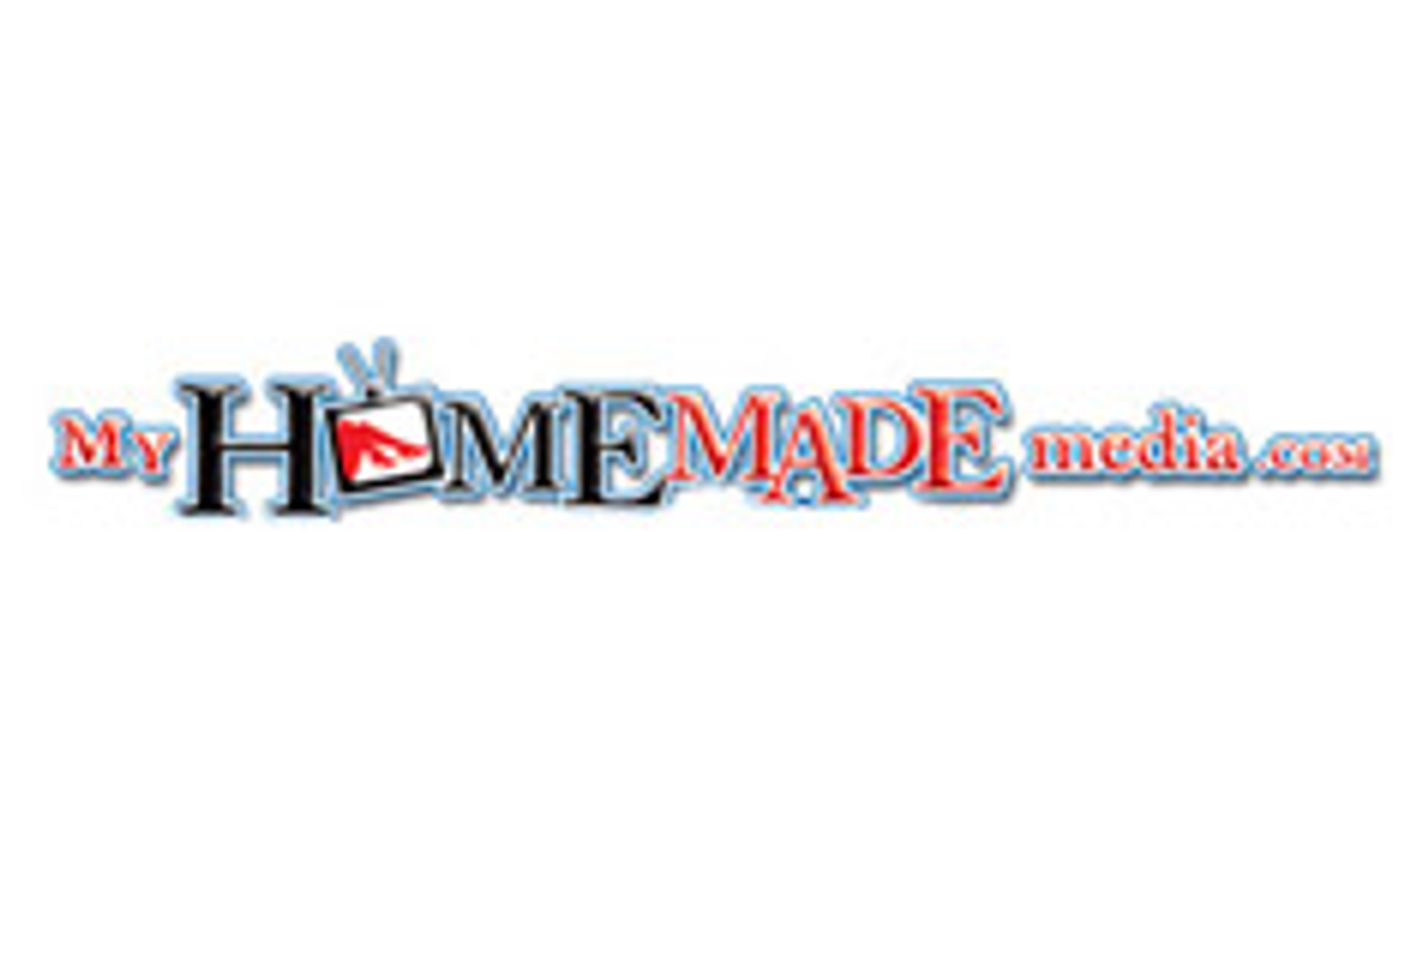 Home Made Media Receives More Couples Submissions